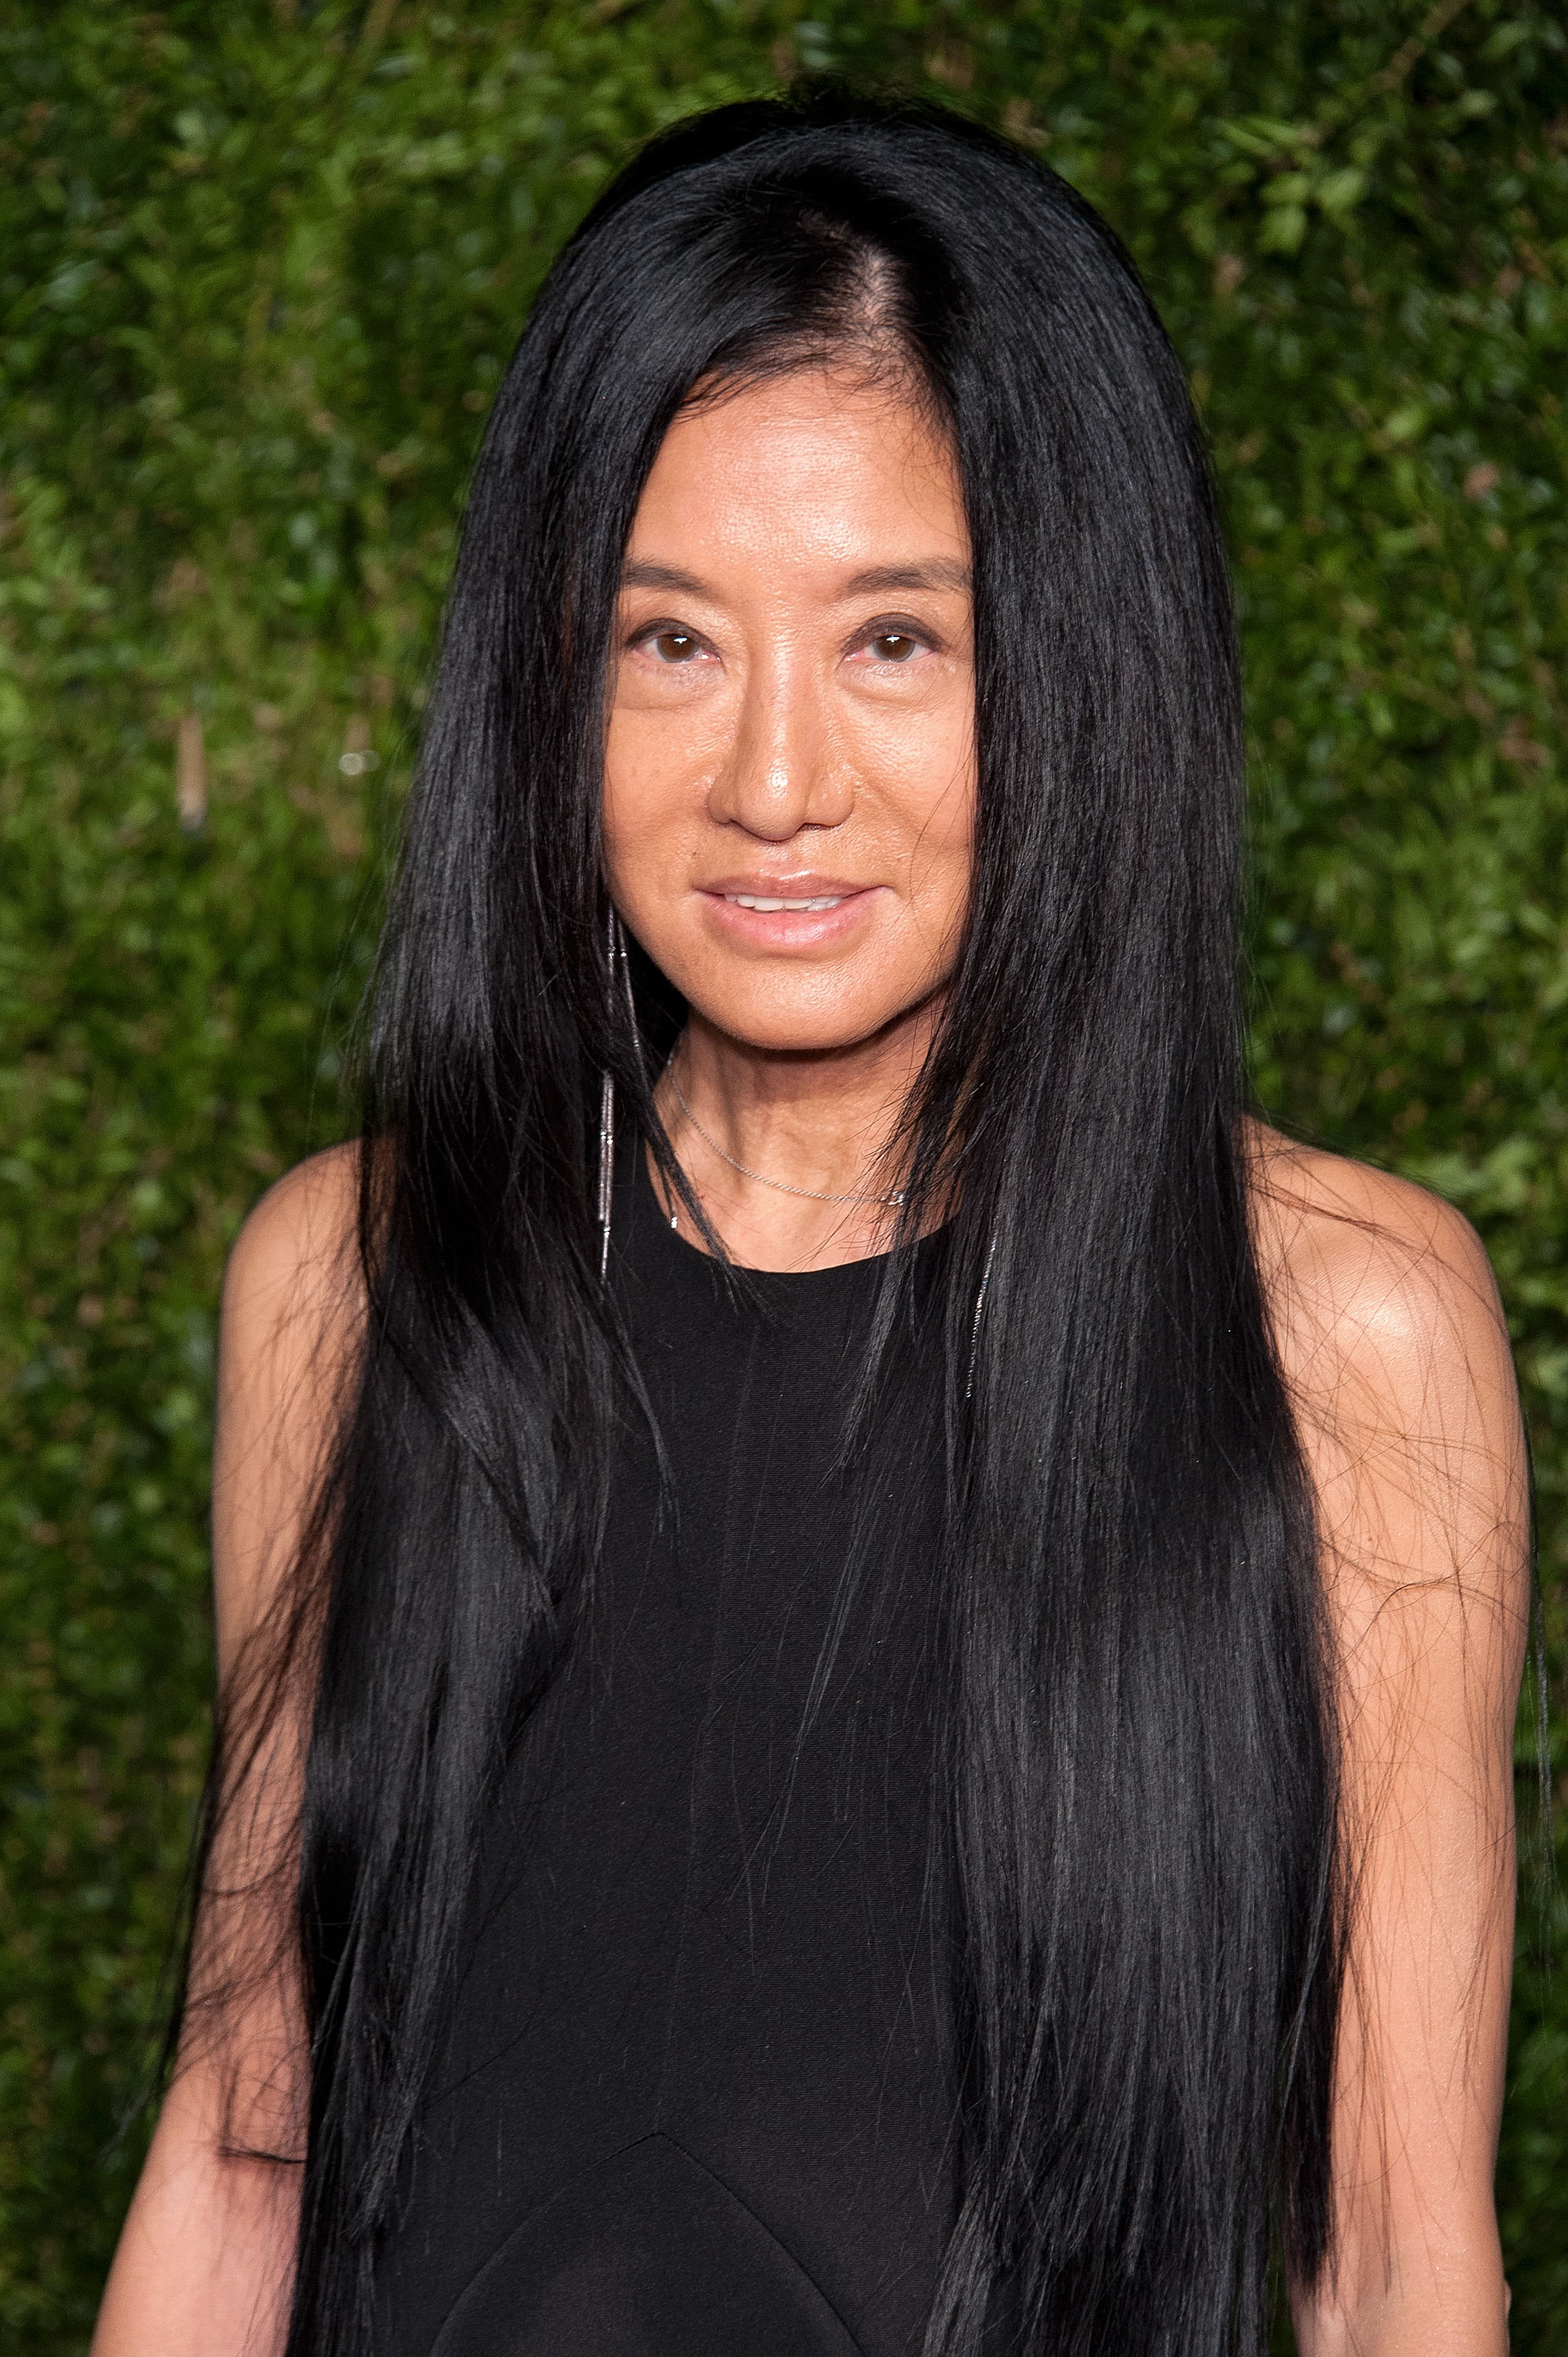 Vera Wang at the 12th annual CFDA/Vogue Fashion Fund Awards in New York City on Nov. 2, 2015.